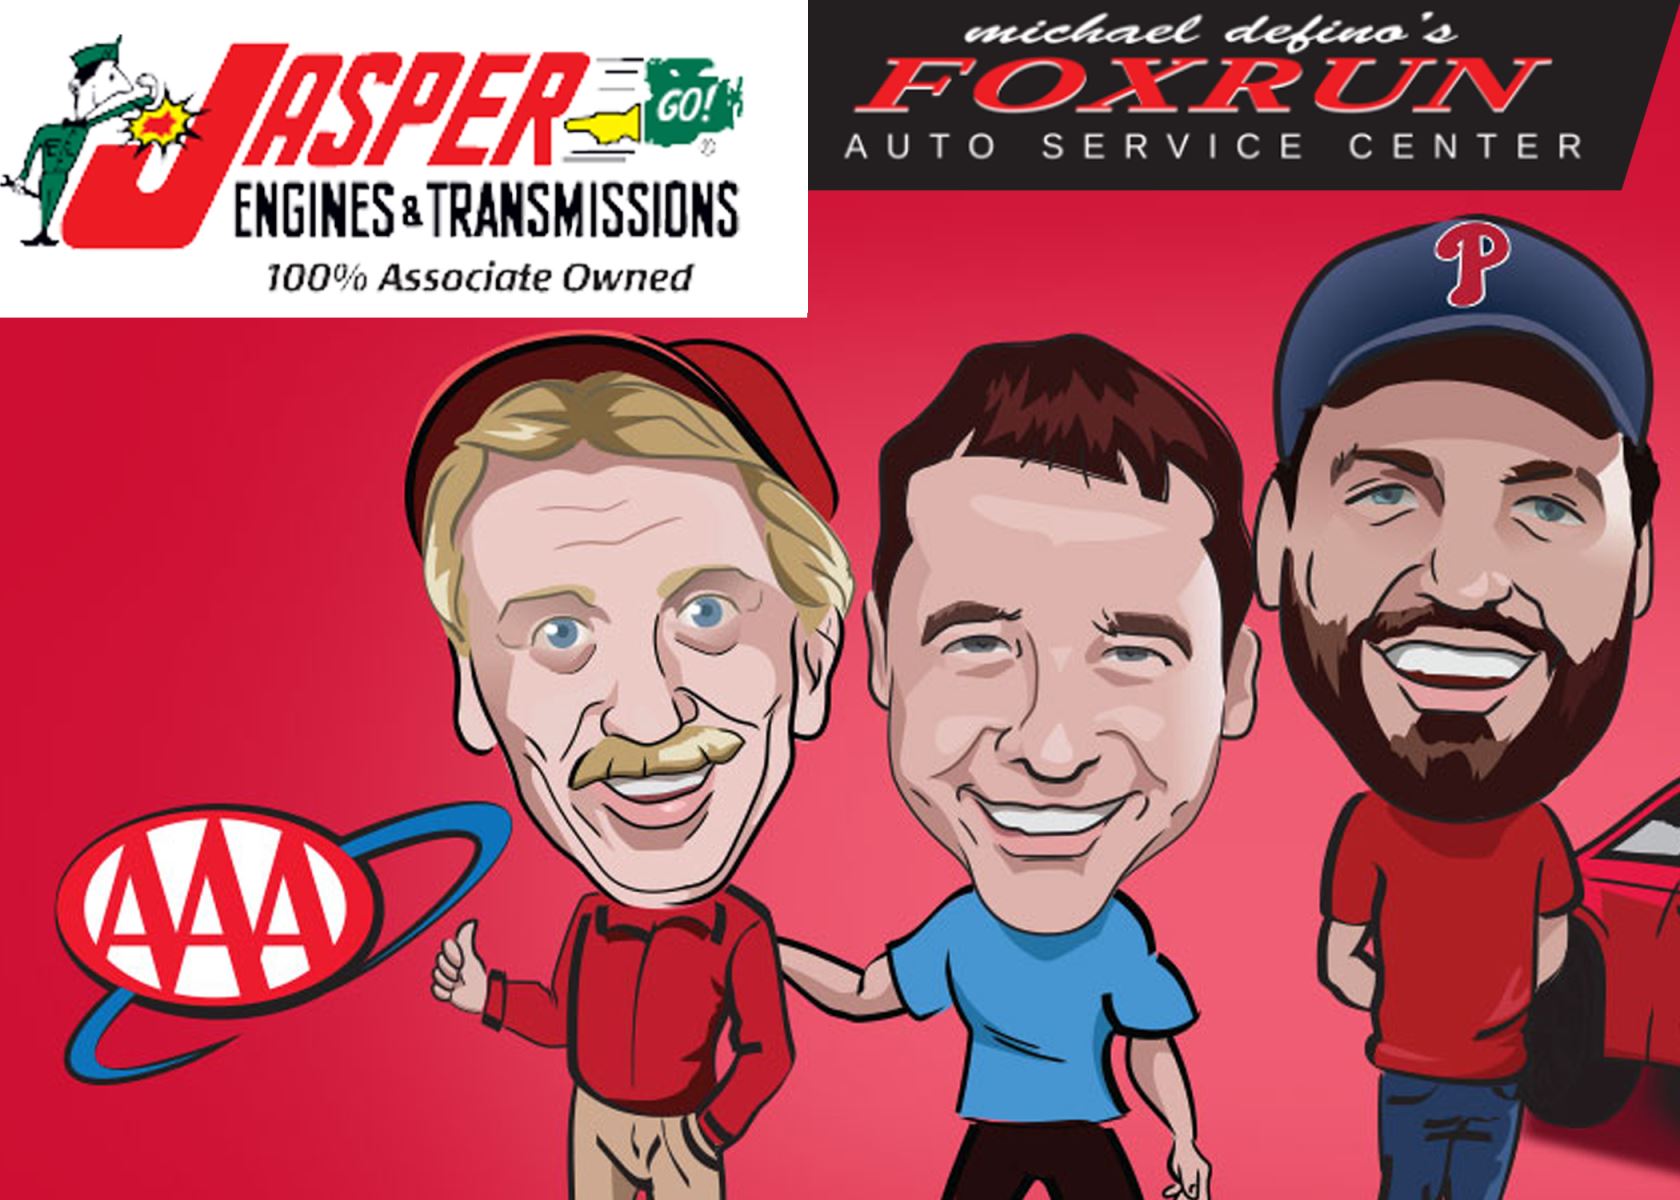 Why Fox Run Auto is a Provider of Jasper Engines & Transmissions